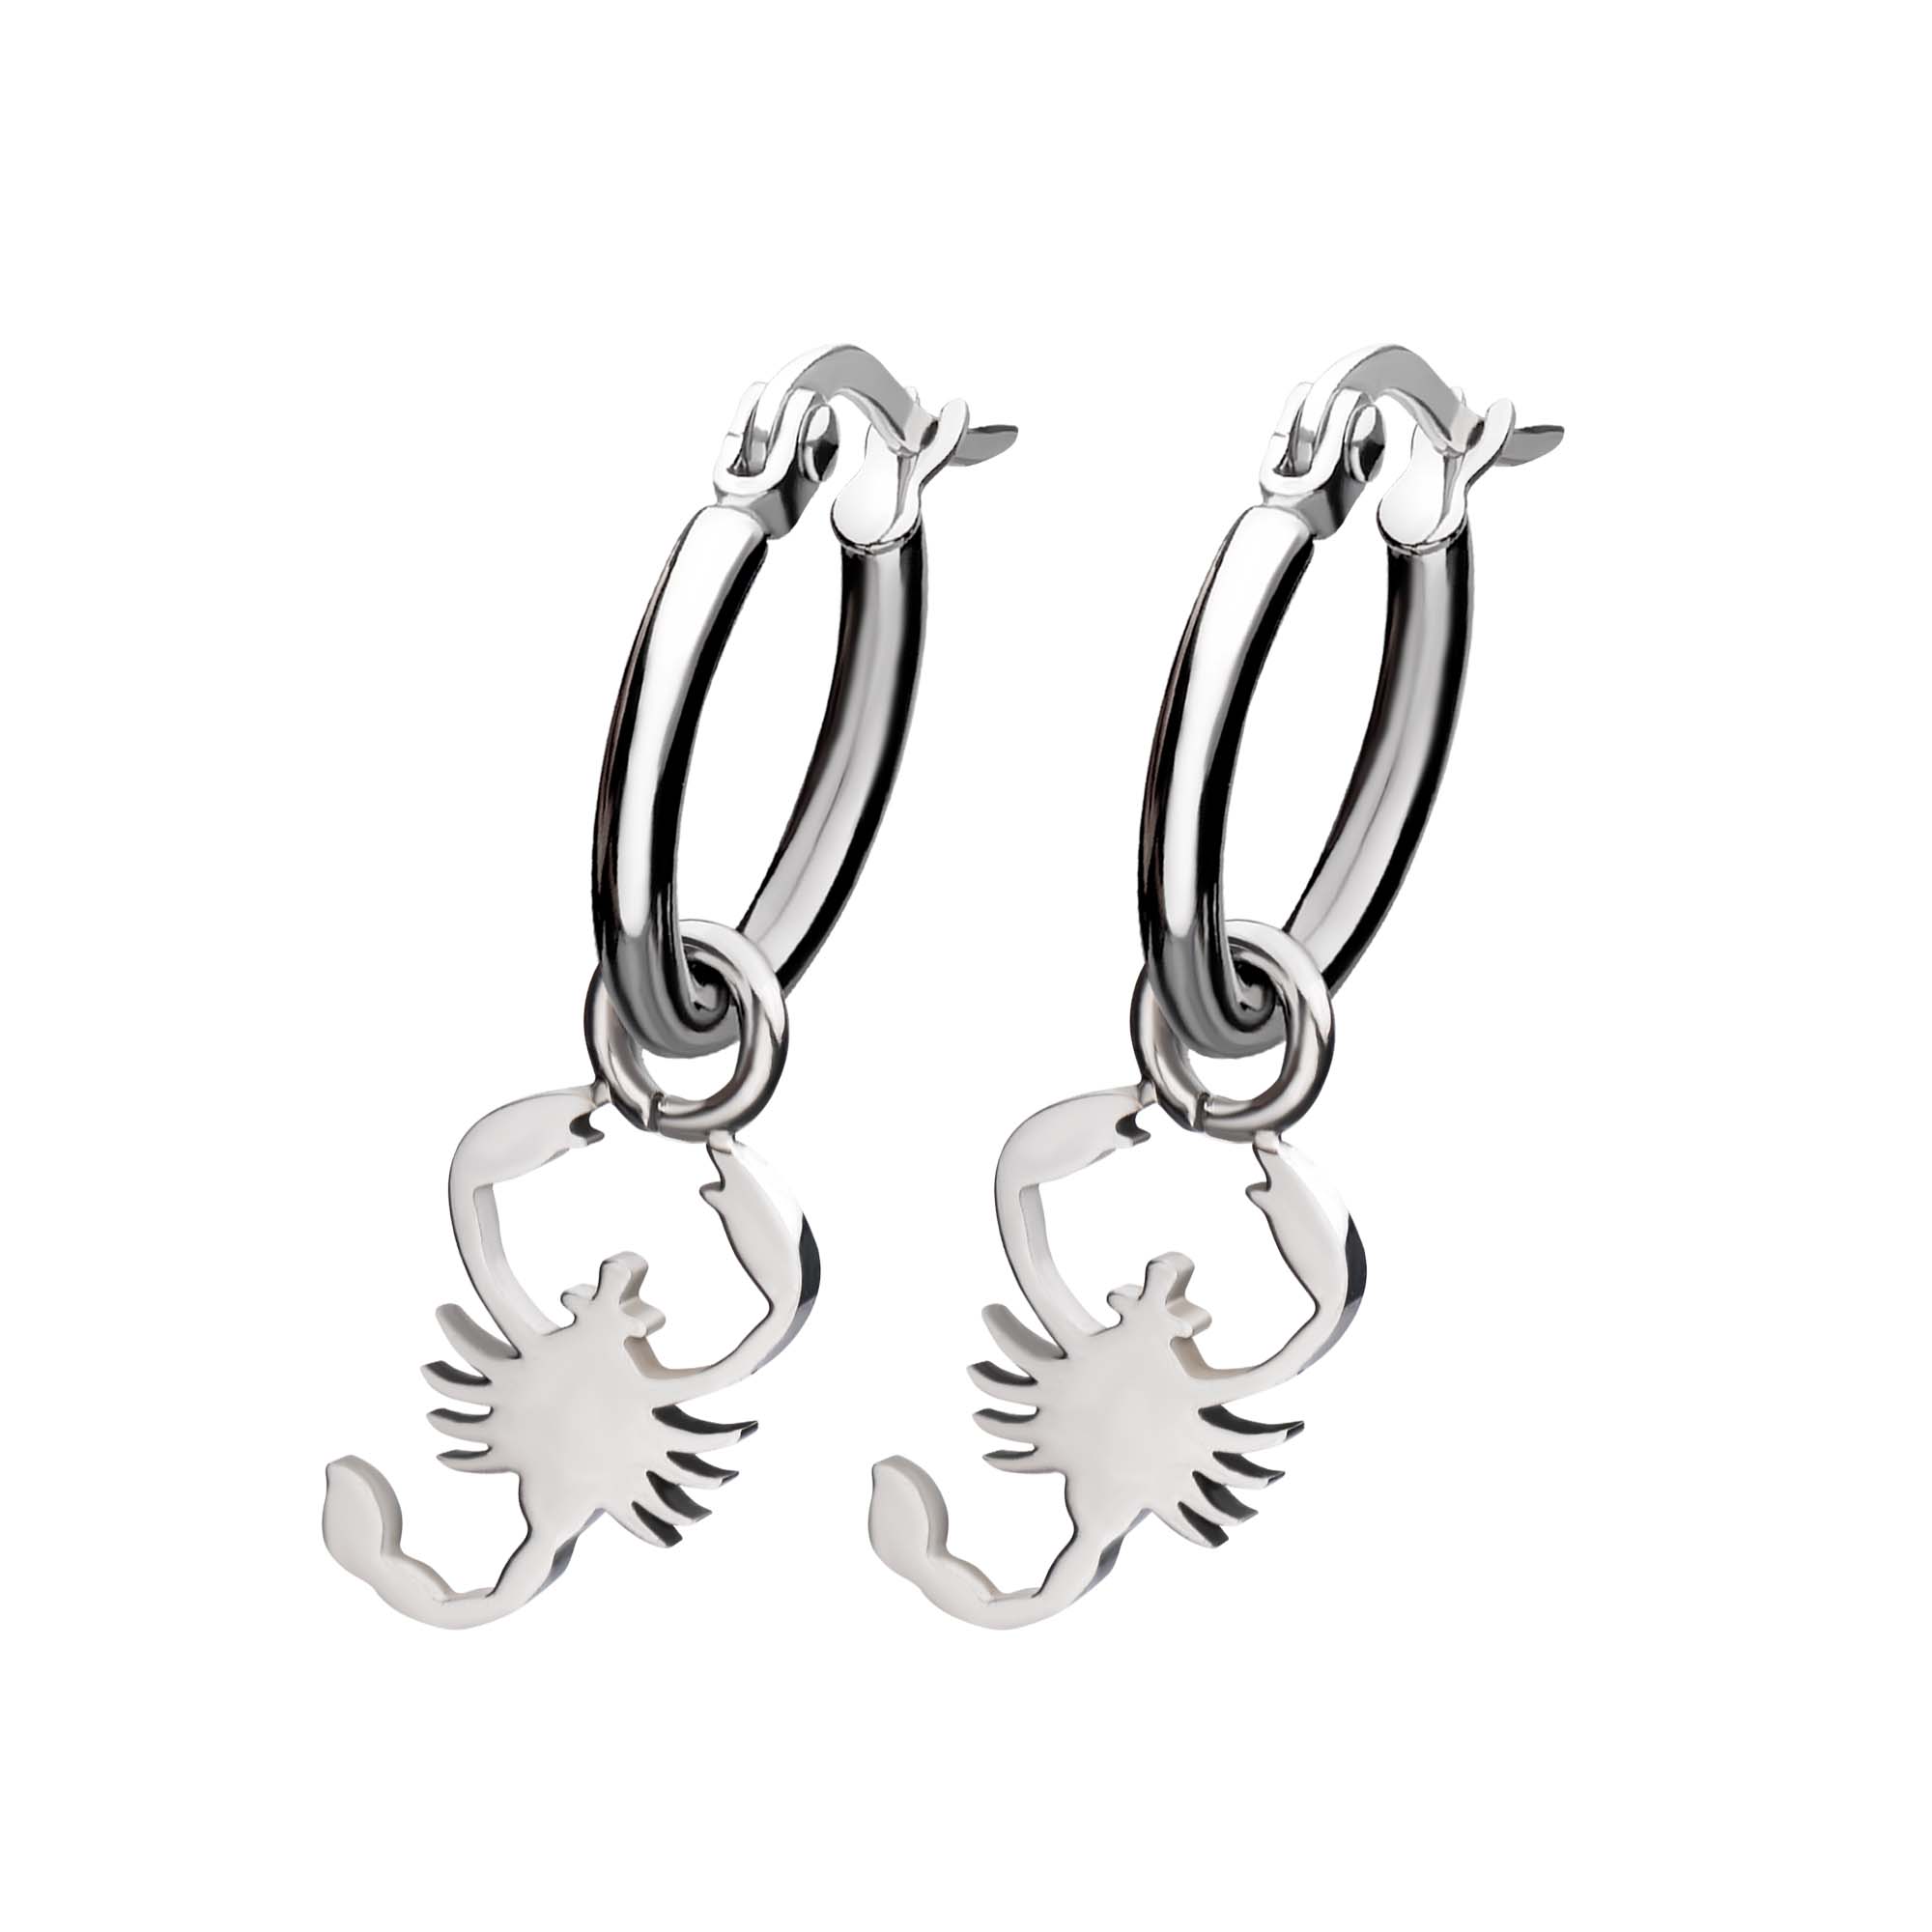 Stainless Steel Hoop Earrings with Scorpio Charm Image 2 Enchanted Jewelry Plainfield, CT